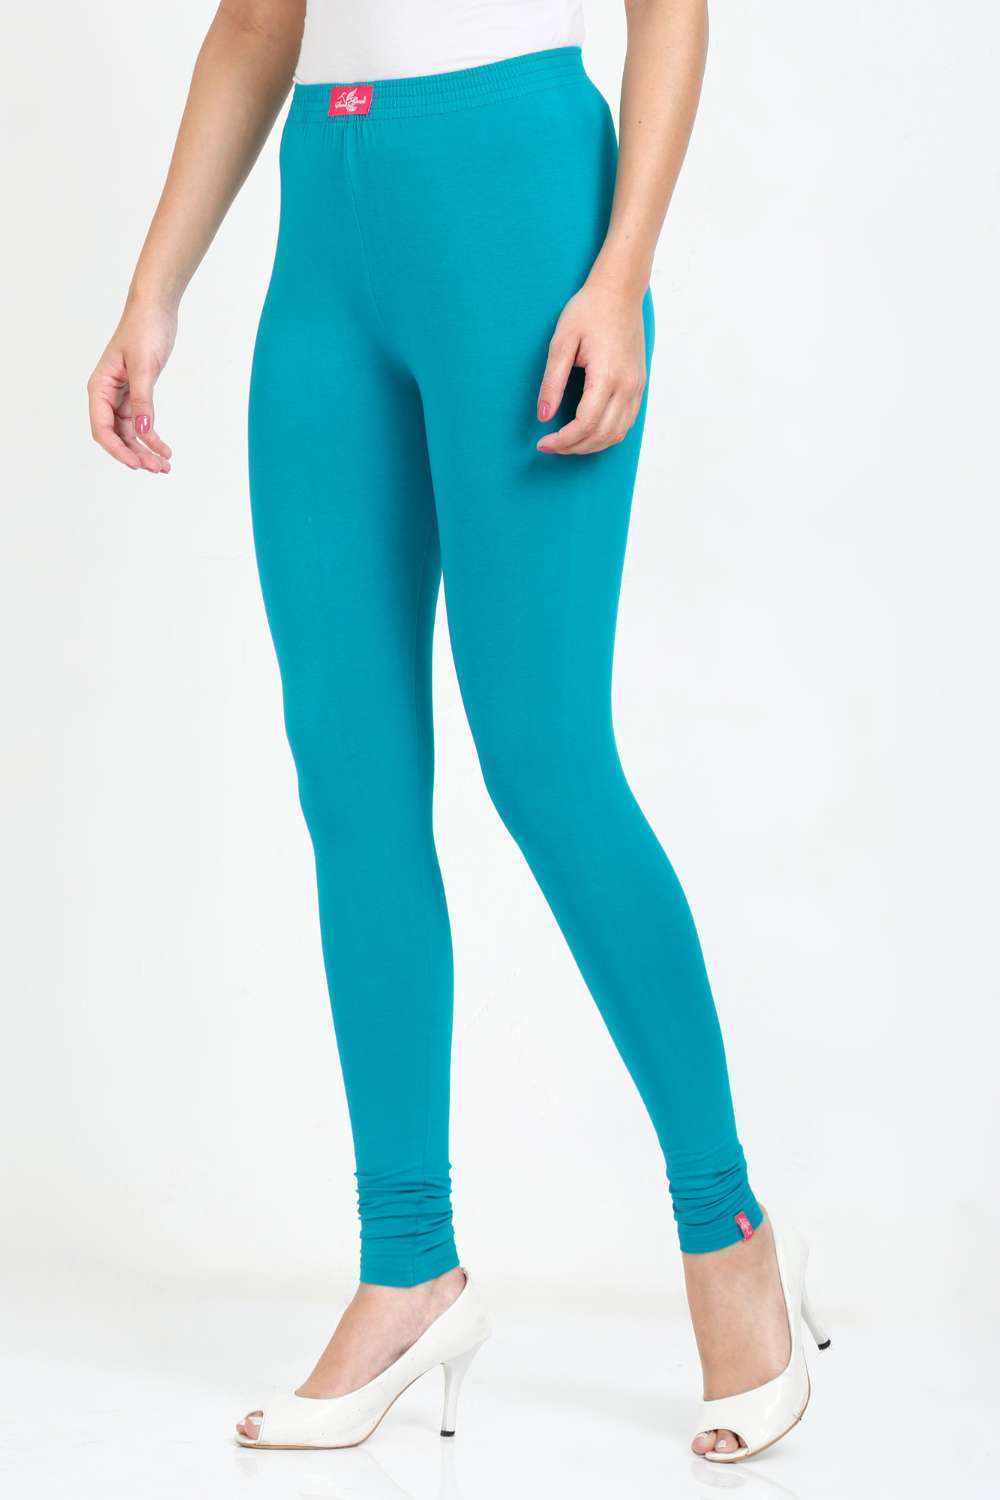 Combo of Solid Color Lycra Leggings in Beige and Navy Blue : BNJ795